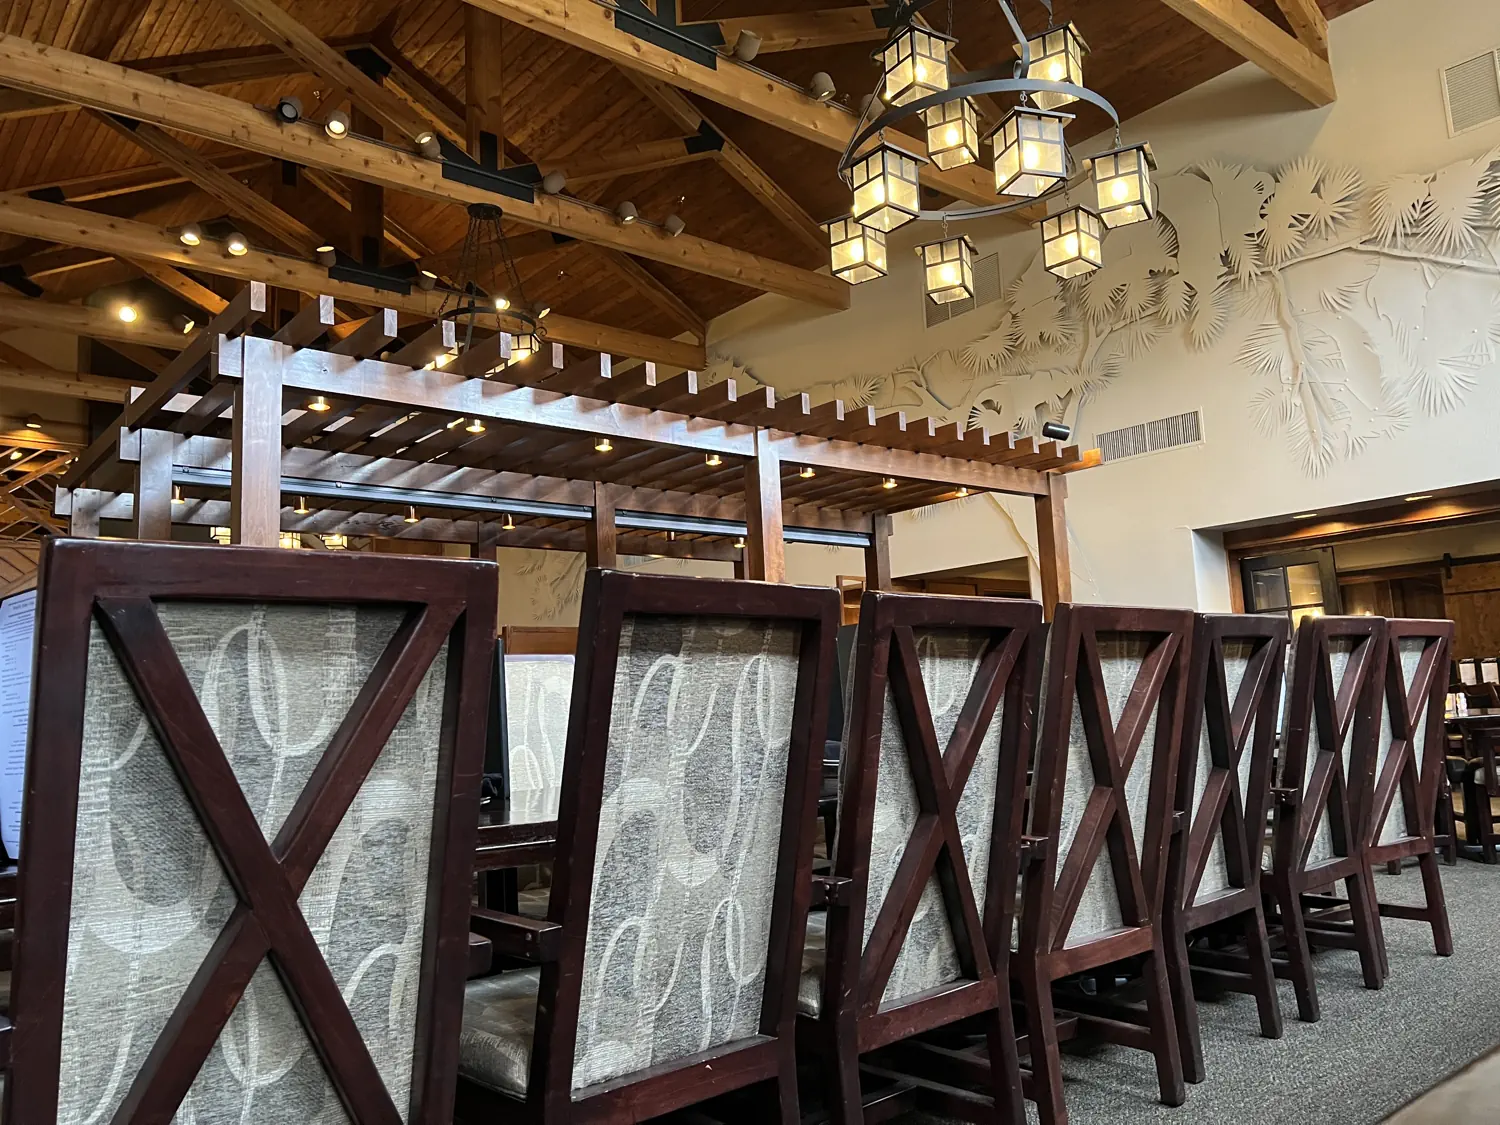 The beautiful wooden interior of Carvers Steak & Seafood.